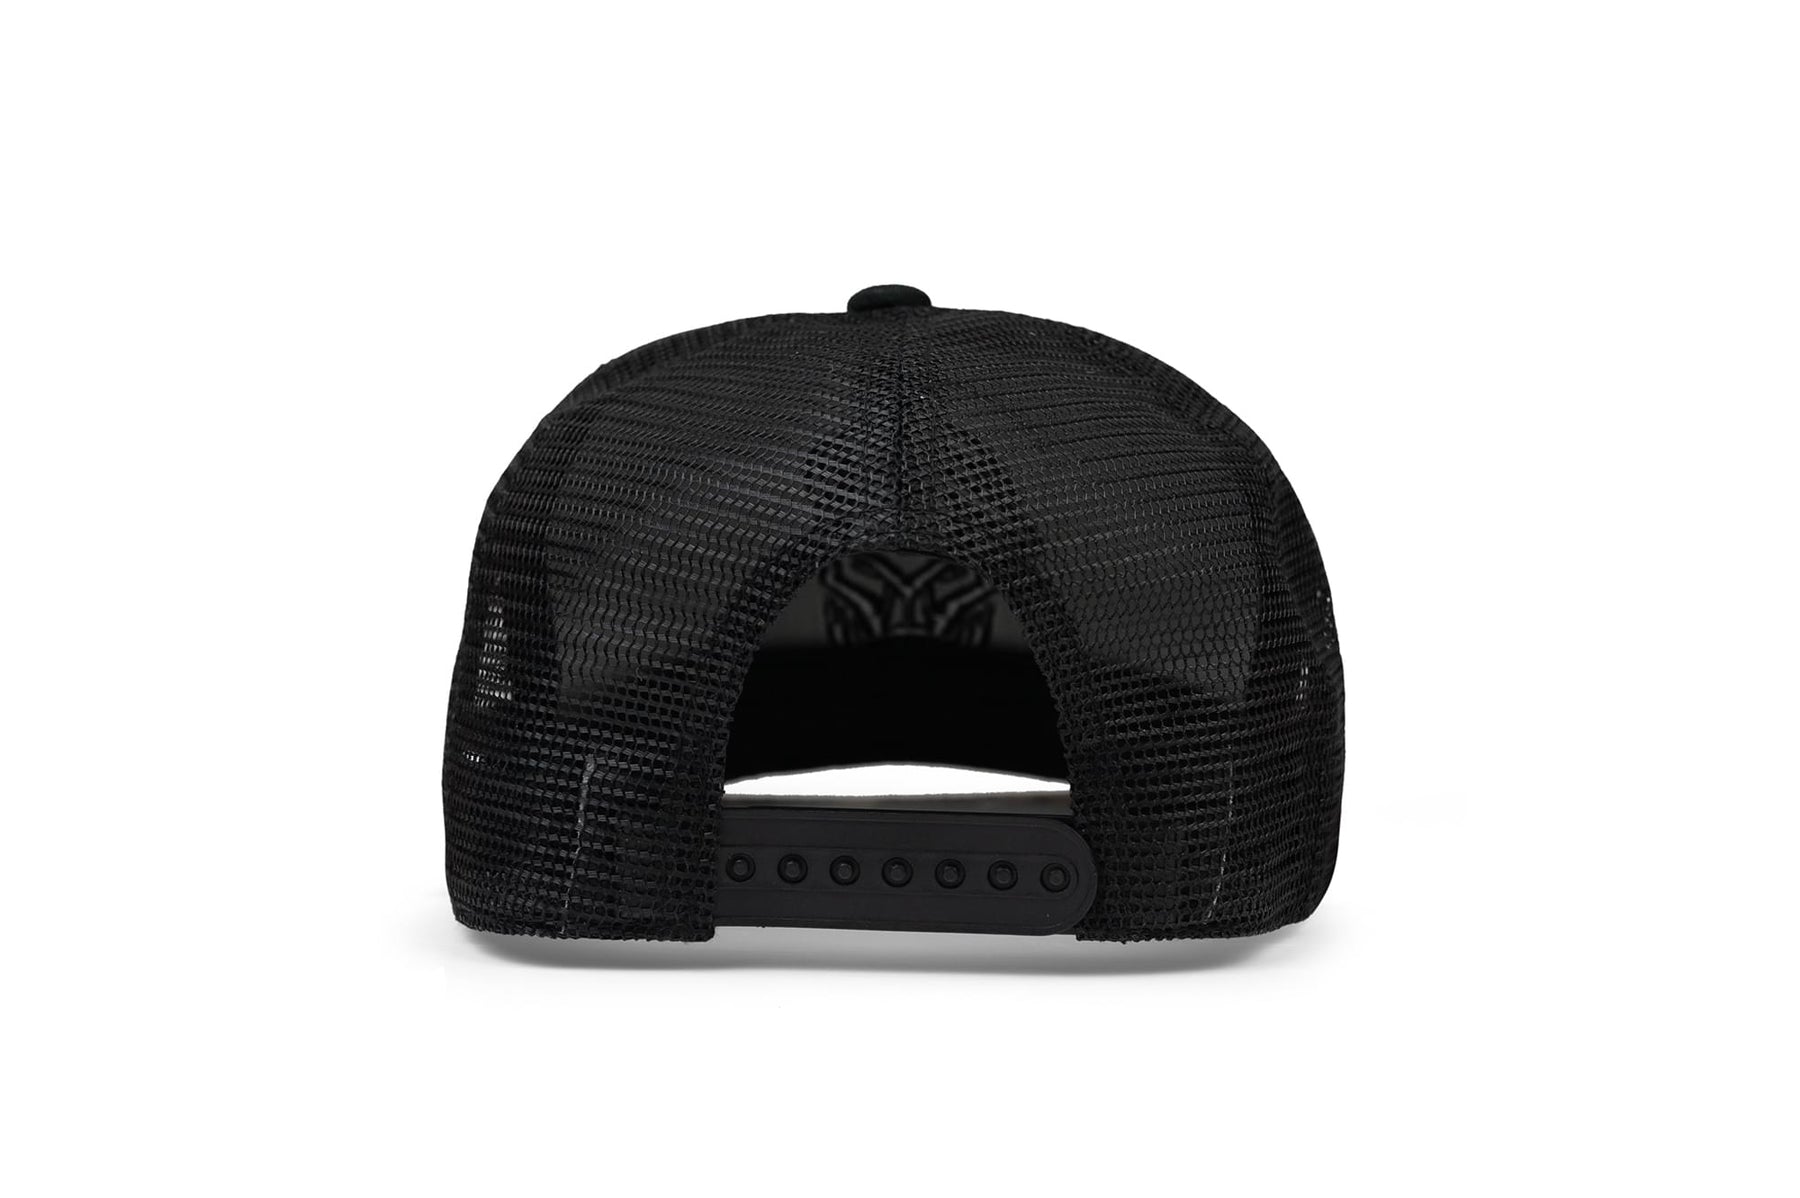 Call Of Duty: Black Ops 4 Skull Logo Emblem Trucker Hat | Sized For Adults